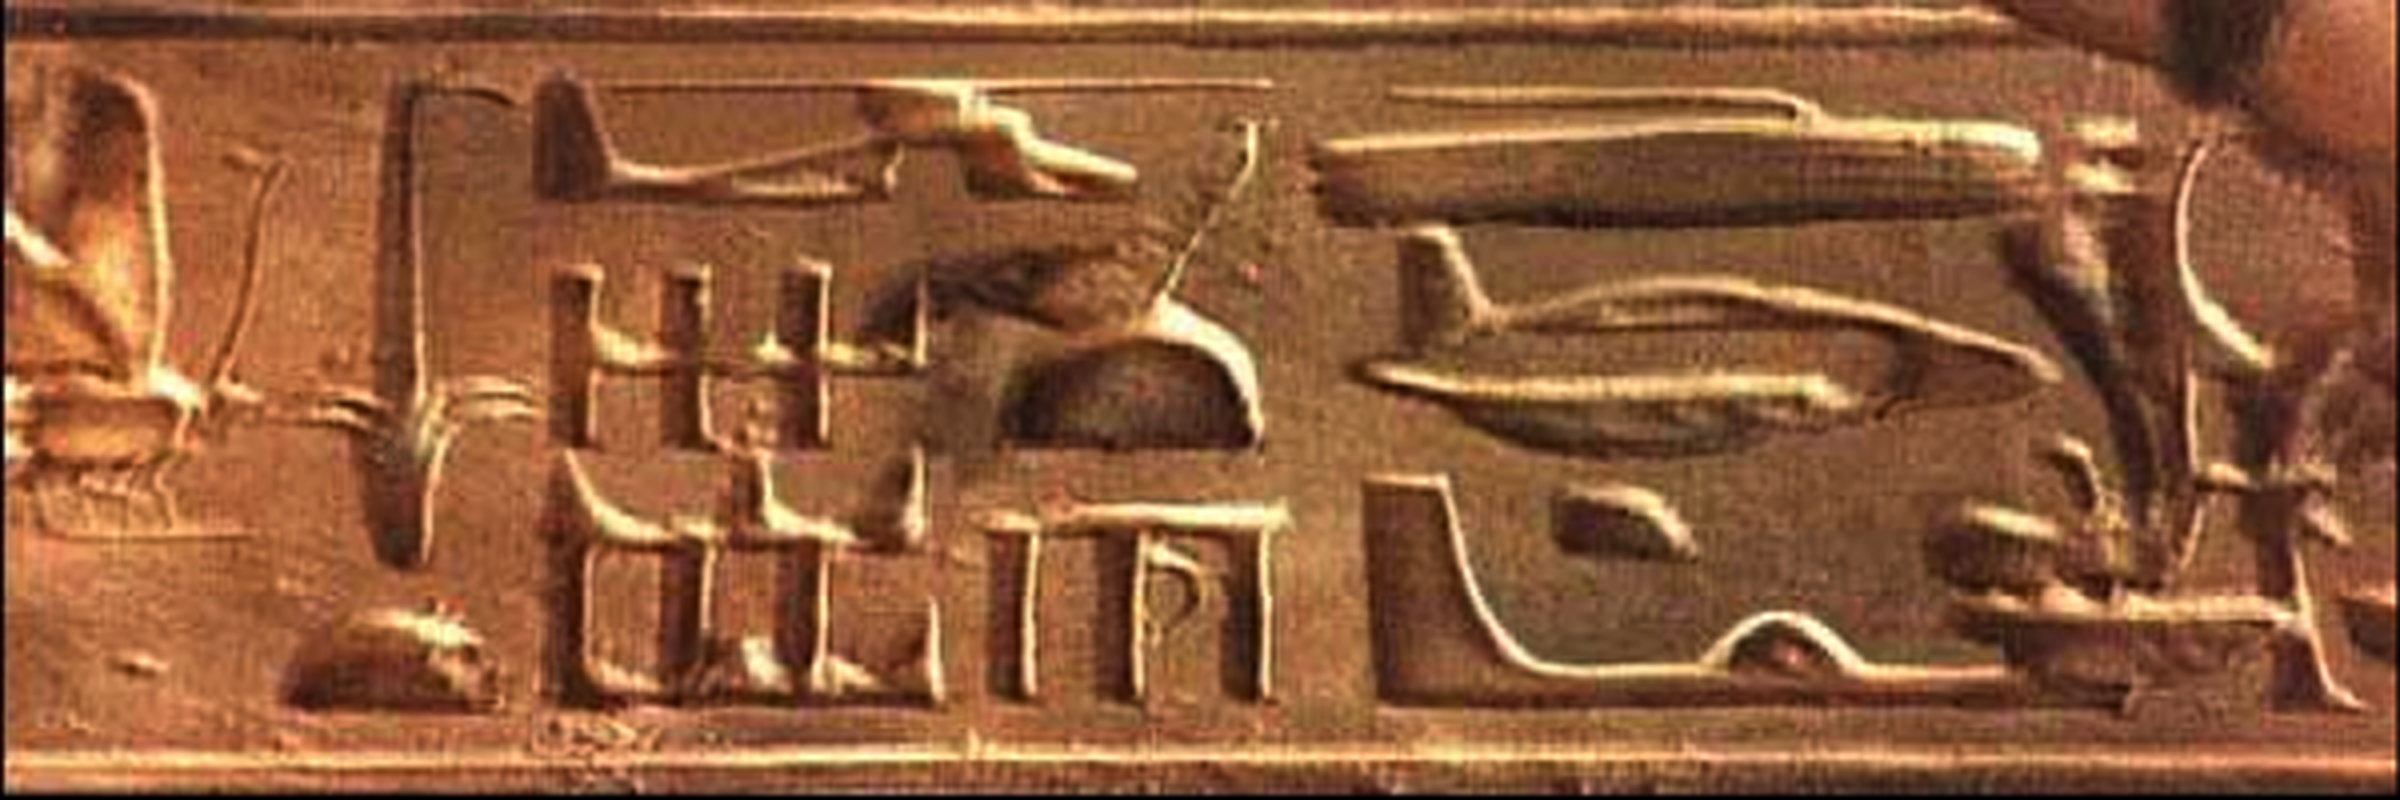 Hot: Announcing evidence of aliens appearing in Egypt since ancient times?